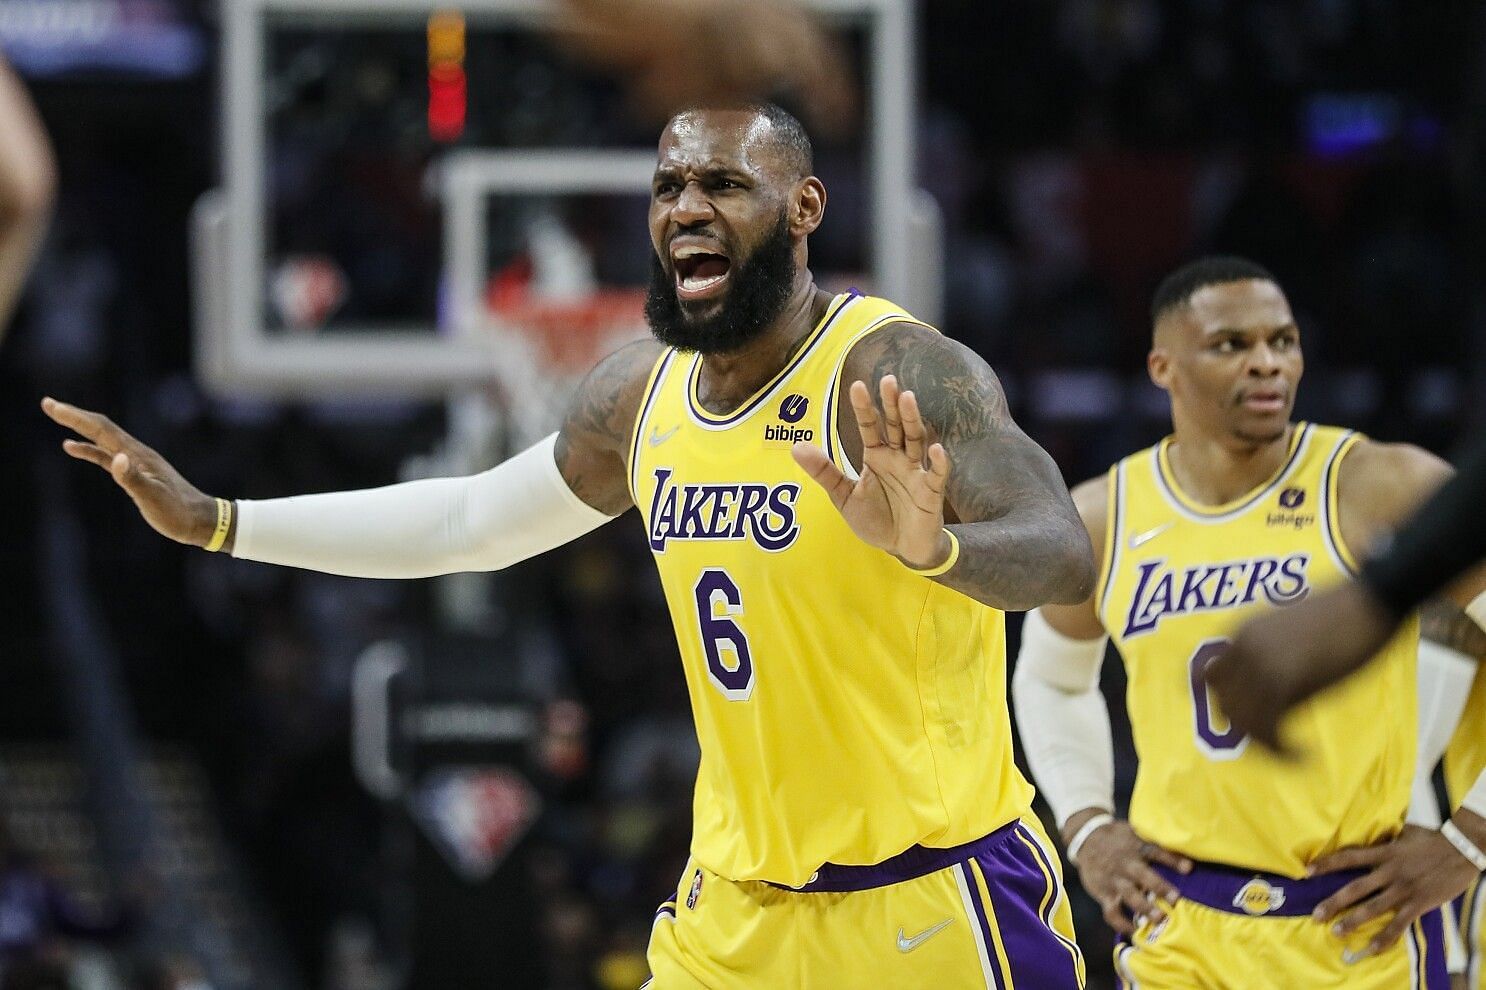 LeBron James and the LA Lakers are one of the worst defensive teams in the NBA in their last 10 games. [Photo: Los Angeles Times]